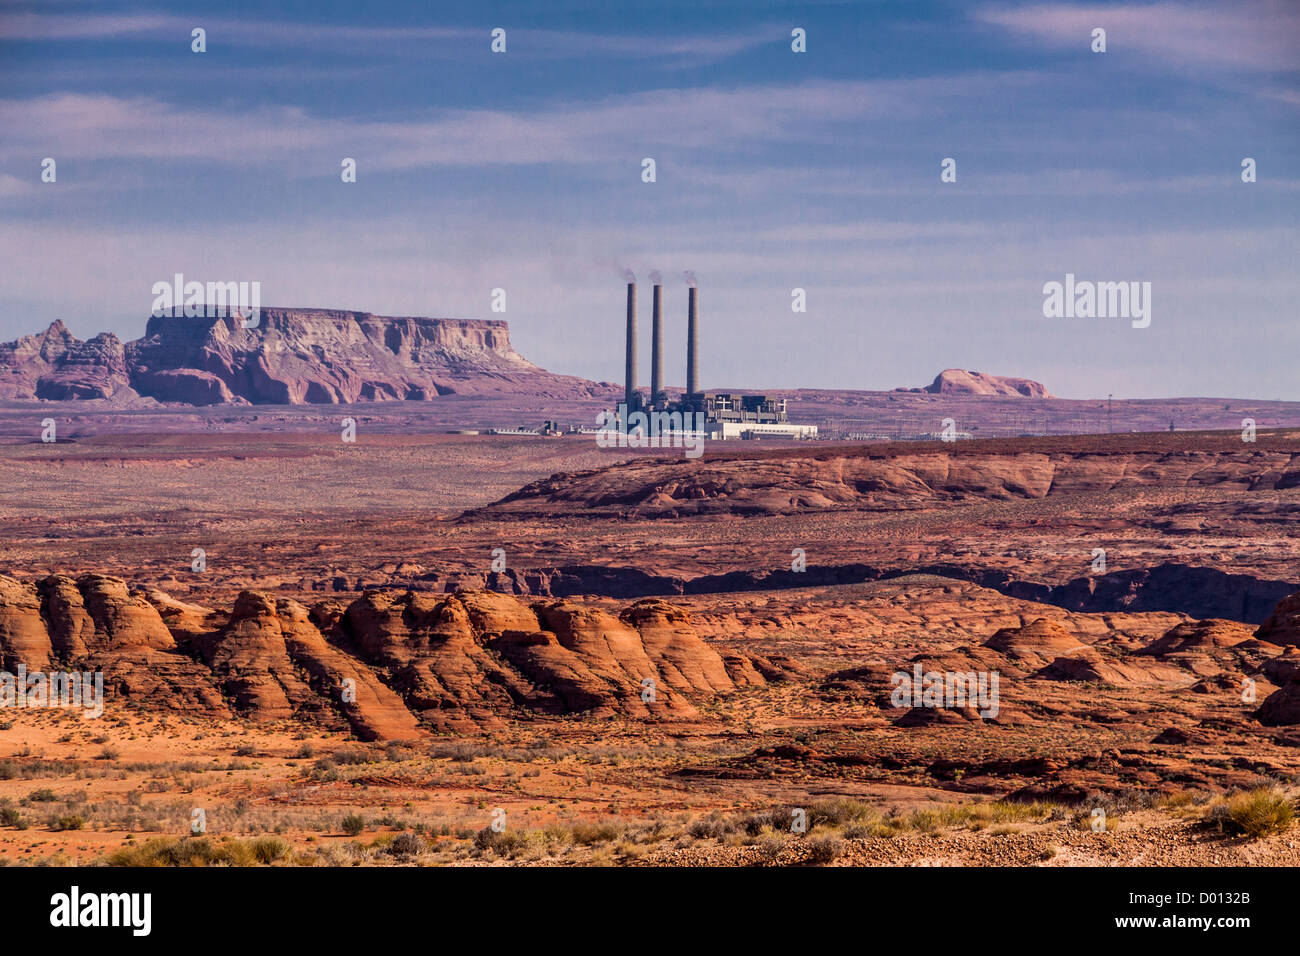 Navajo Generating Station, a 2250 megawatt coal-fired power plant located on the Navajo Indian Reservation near Page, Arizona Stock Photo